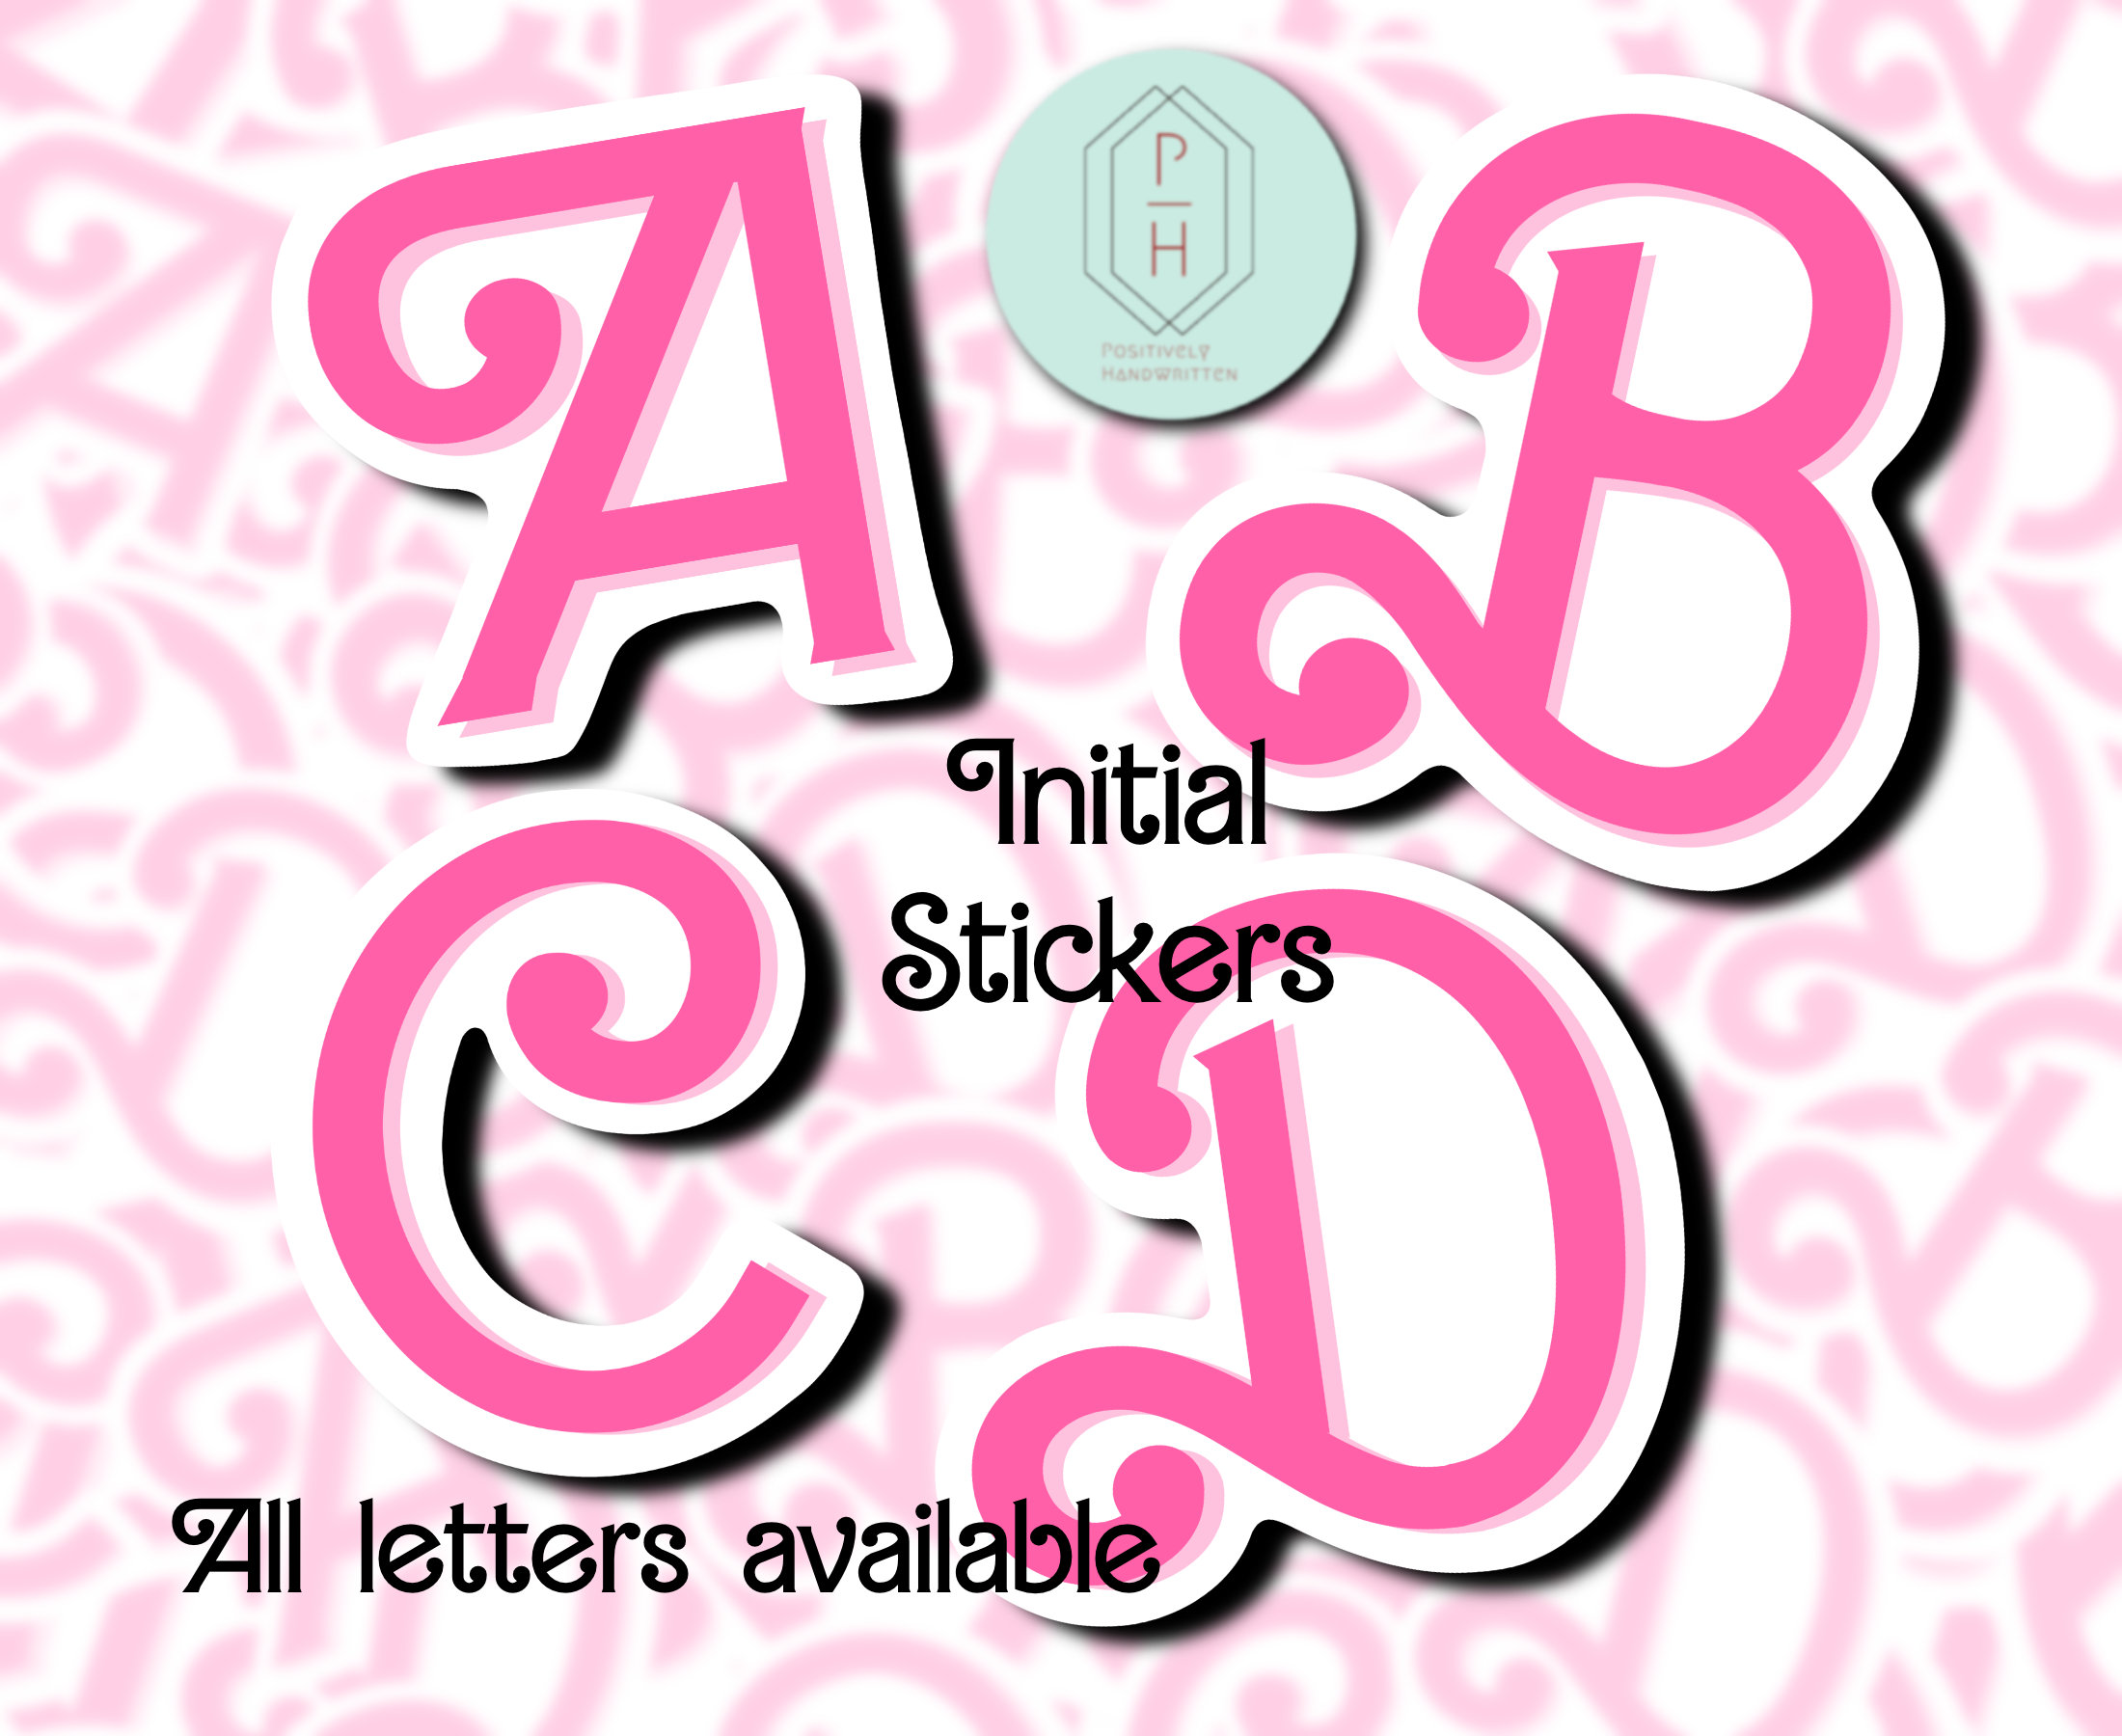 Bold Letter Stickers, Alphabet Stickers, Vinyl Letters, Adhesive Letter,  Number Sheets, Small Abc Letters, Individual Letters, Scrapbook 